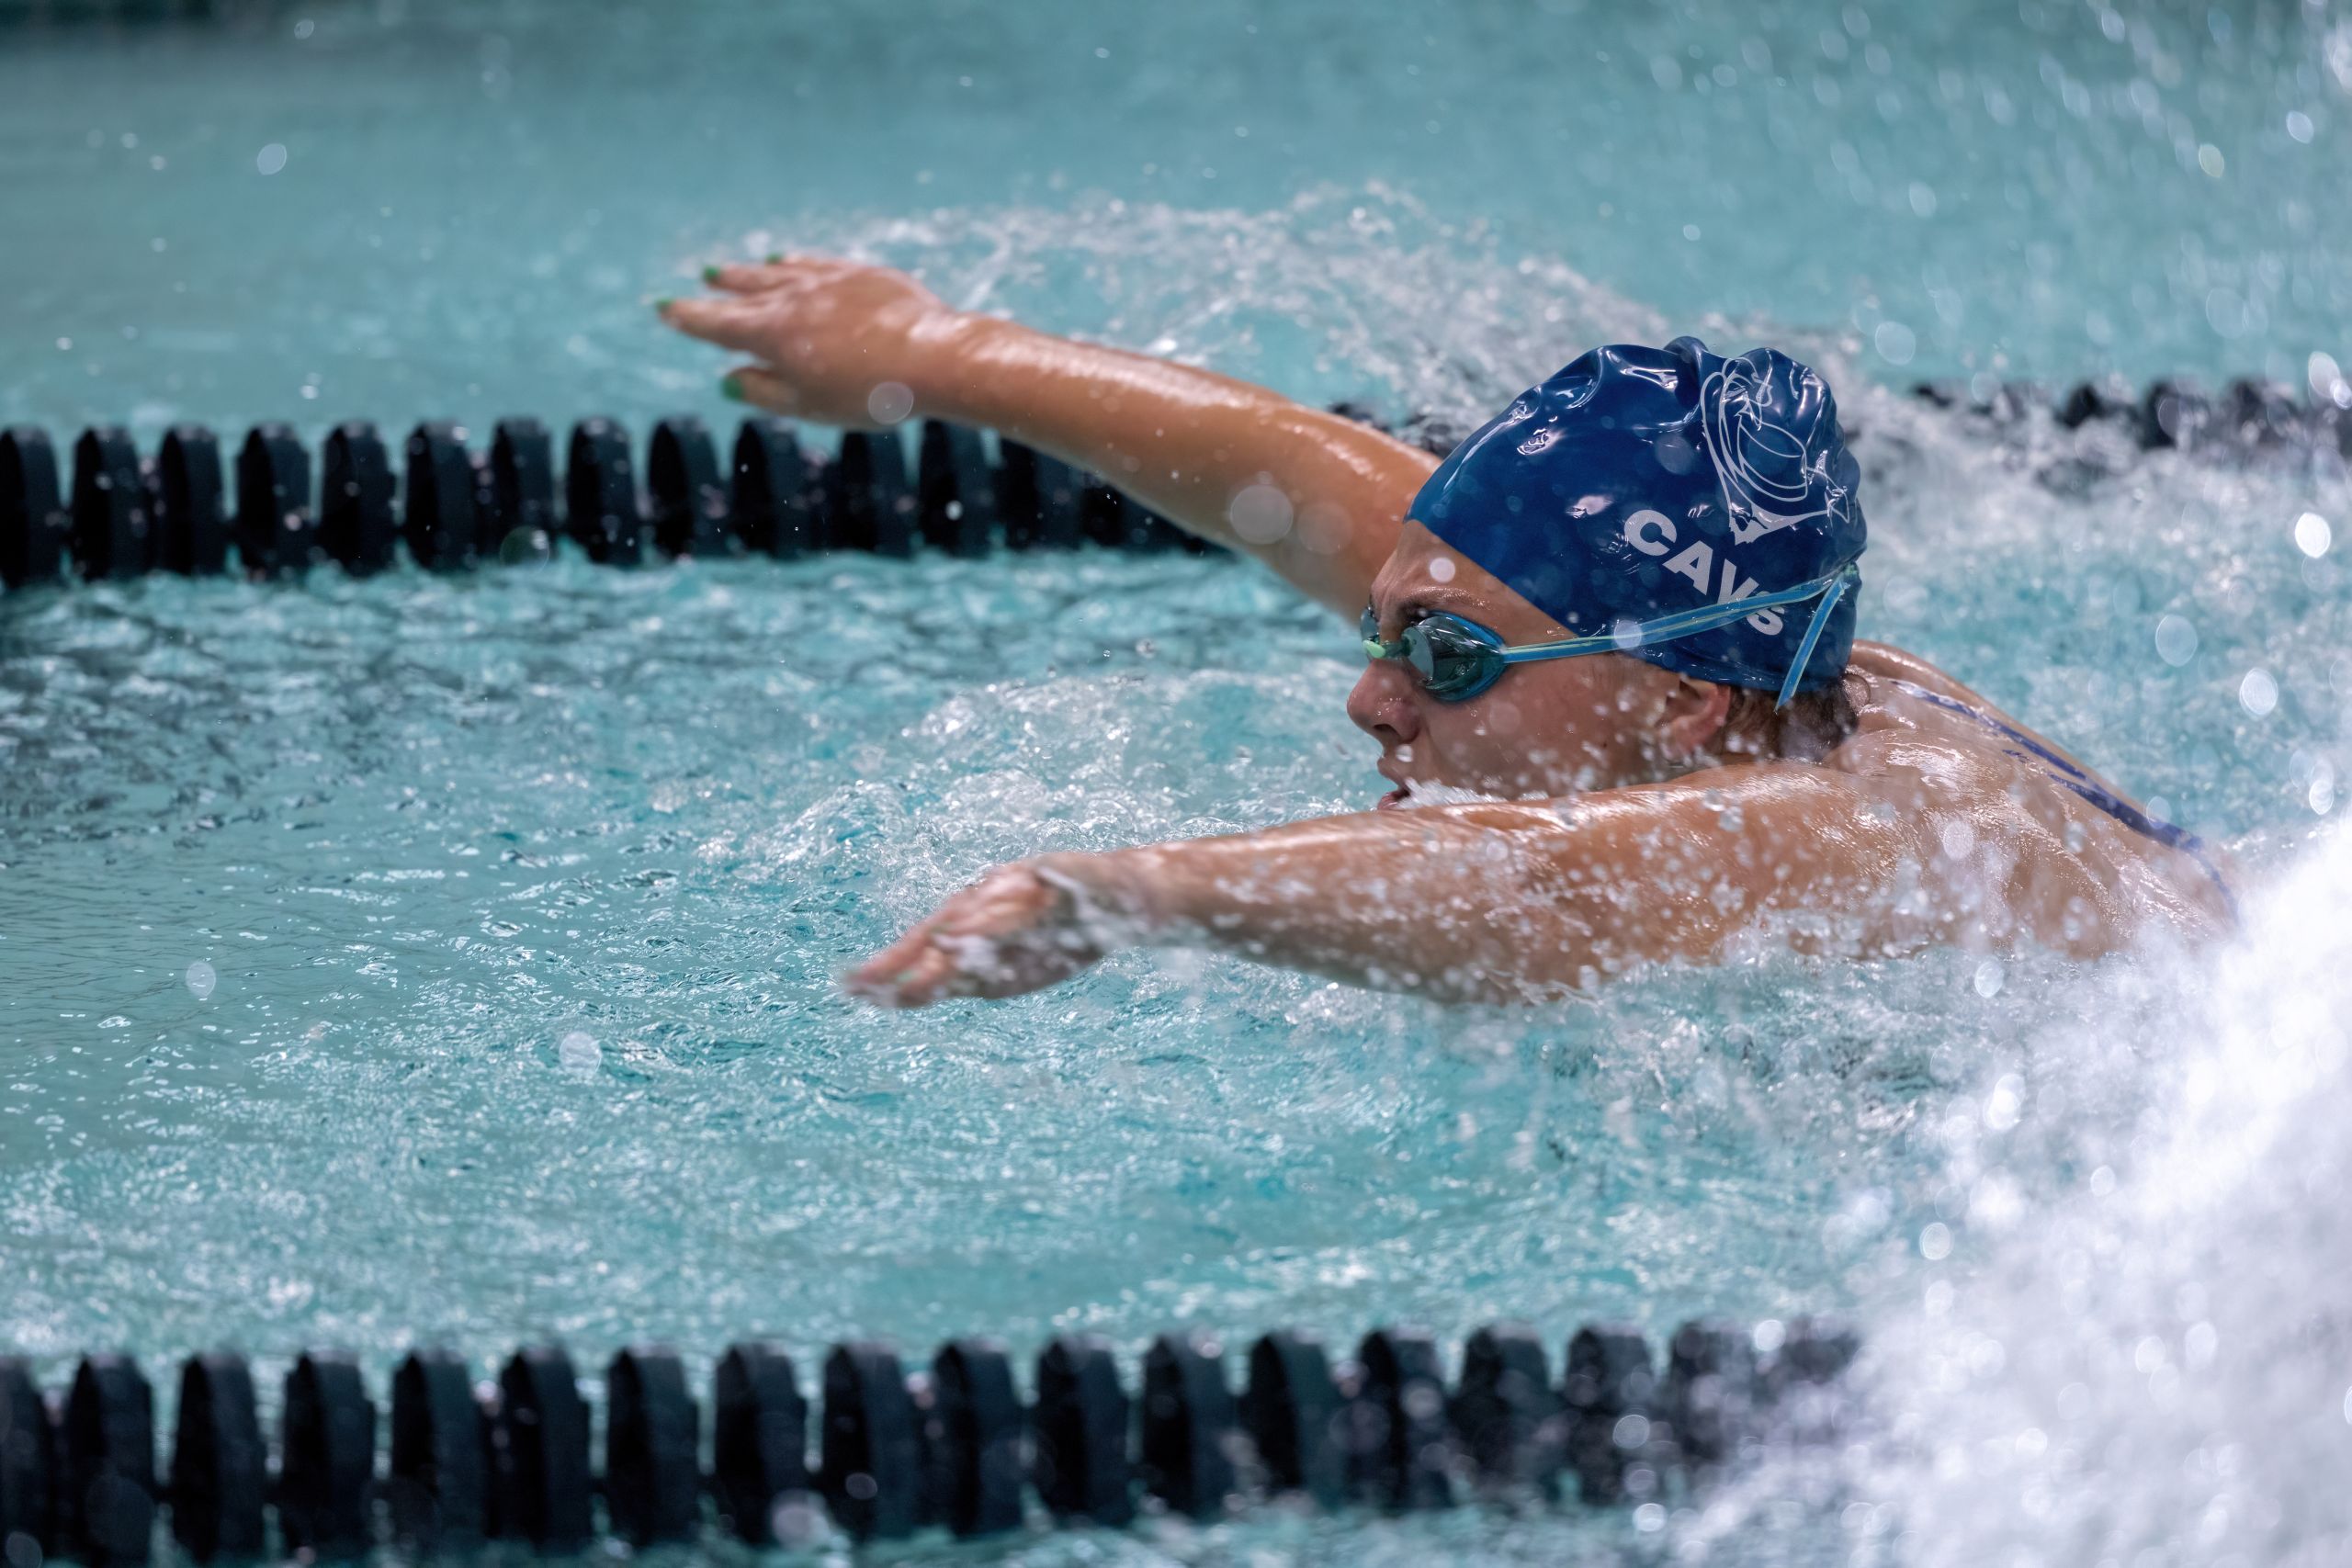 Rory Schrieber during butterfly stroke. Photo by Thomas Ryan.